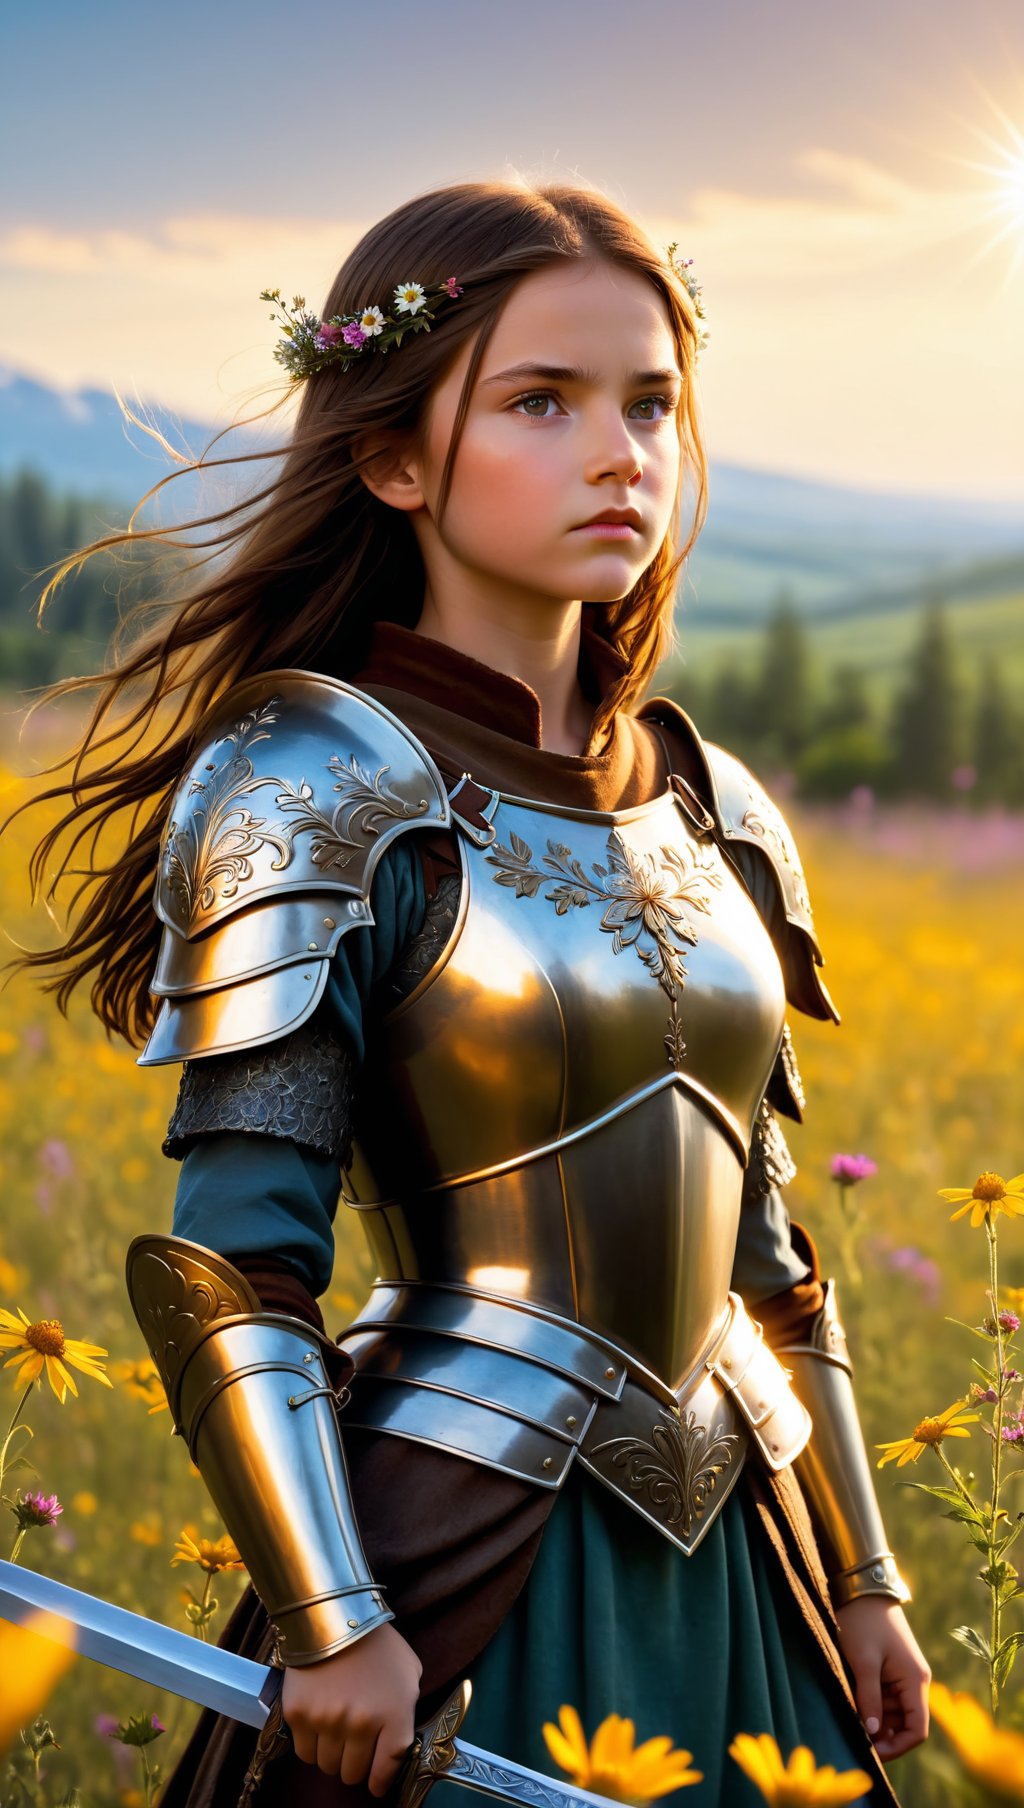 (masterpiece),(best quality),(extremely intricate),(sharp focus),(cinematic lighting),(extremely detailed),A young girl in armor,standing in a meadow of wildflowers. She is holding a sword. She has long brown hair adorned with wildflowers. Her expression is determined,and her eyes are shining with courage. The sun is shining brightly behind her,casting a golden glow over the scene.,flower4rmor,flower bodysuit,Flower,